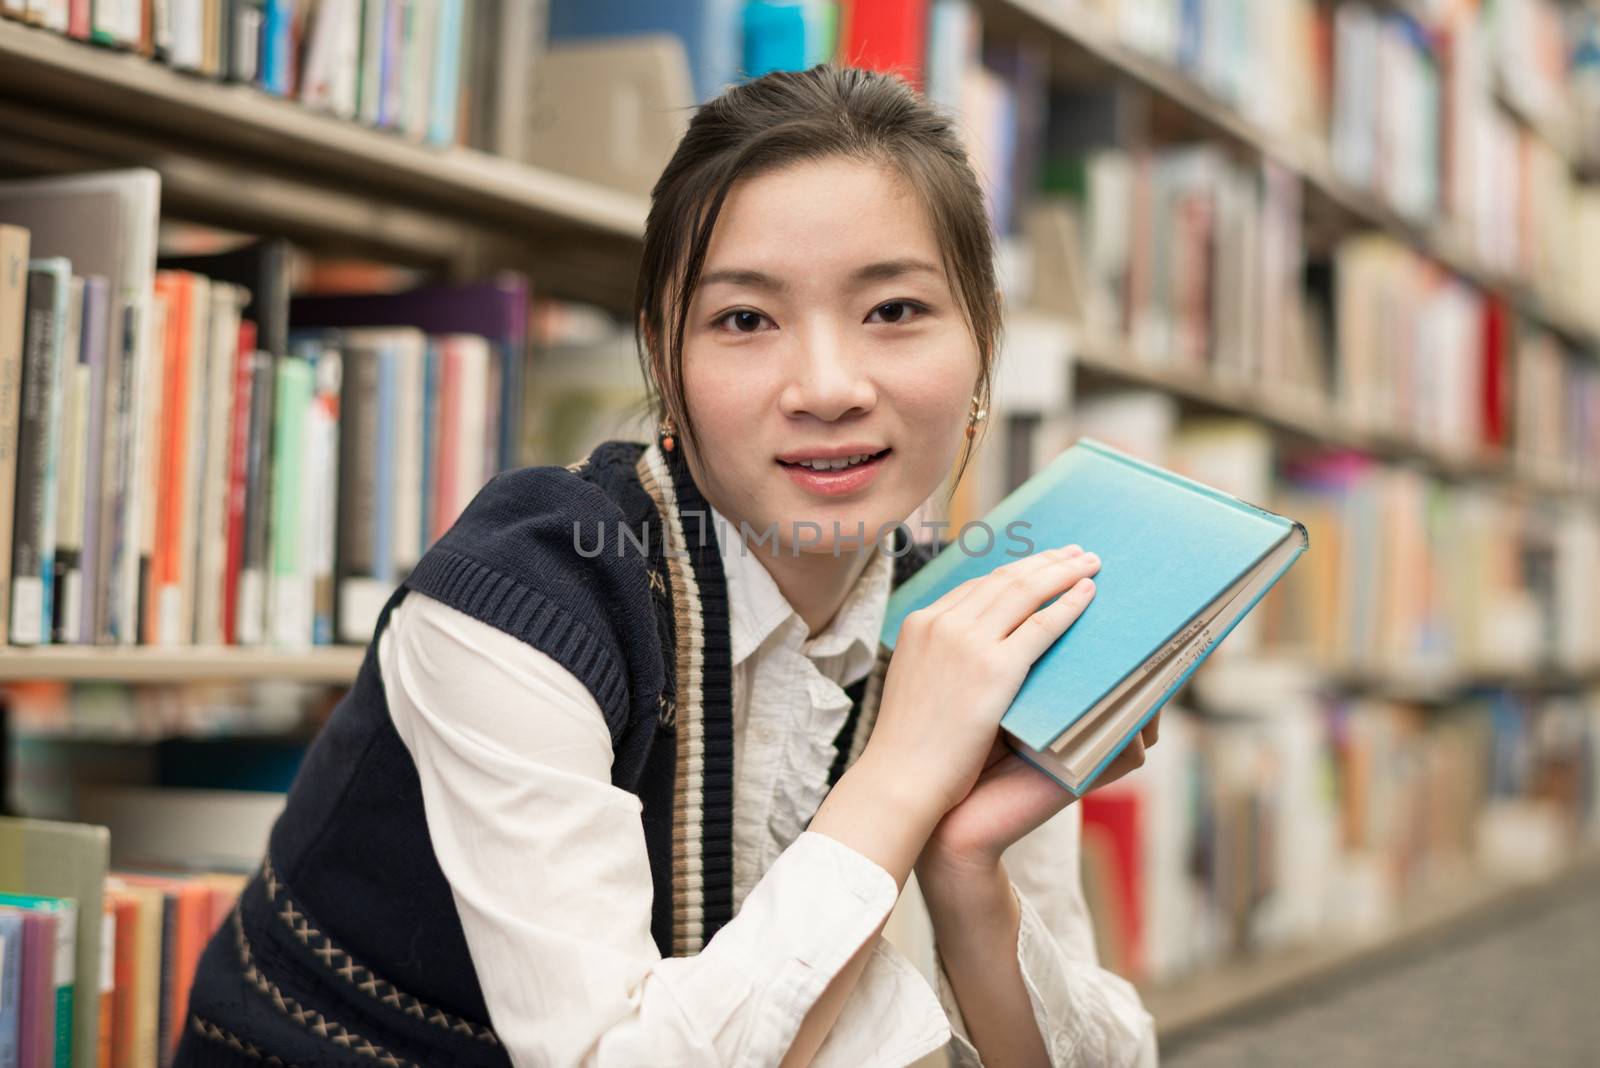 Happy young attractive woman holding a book while sitting in front of a bookshelf